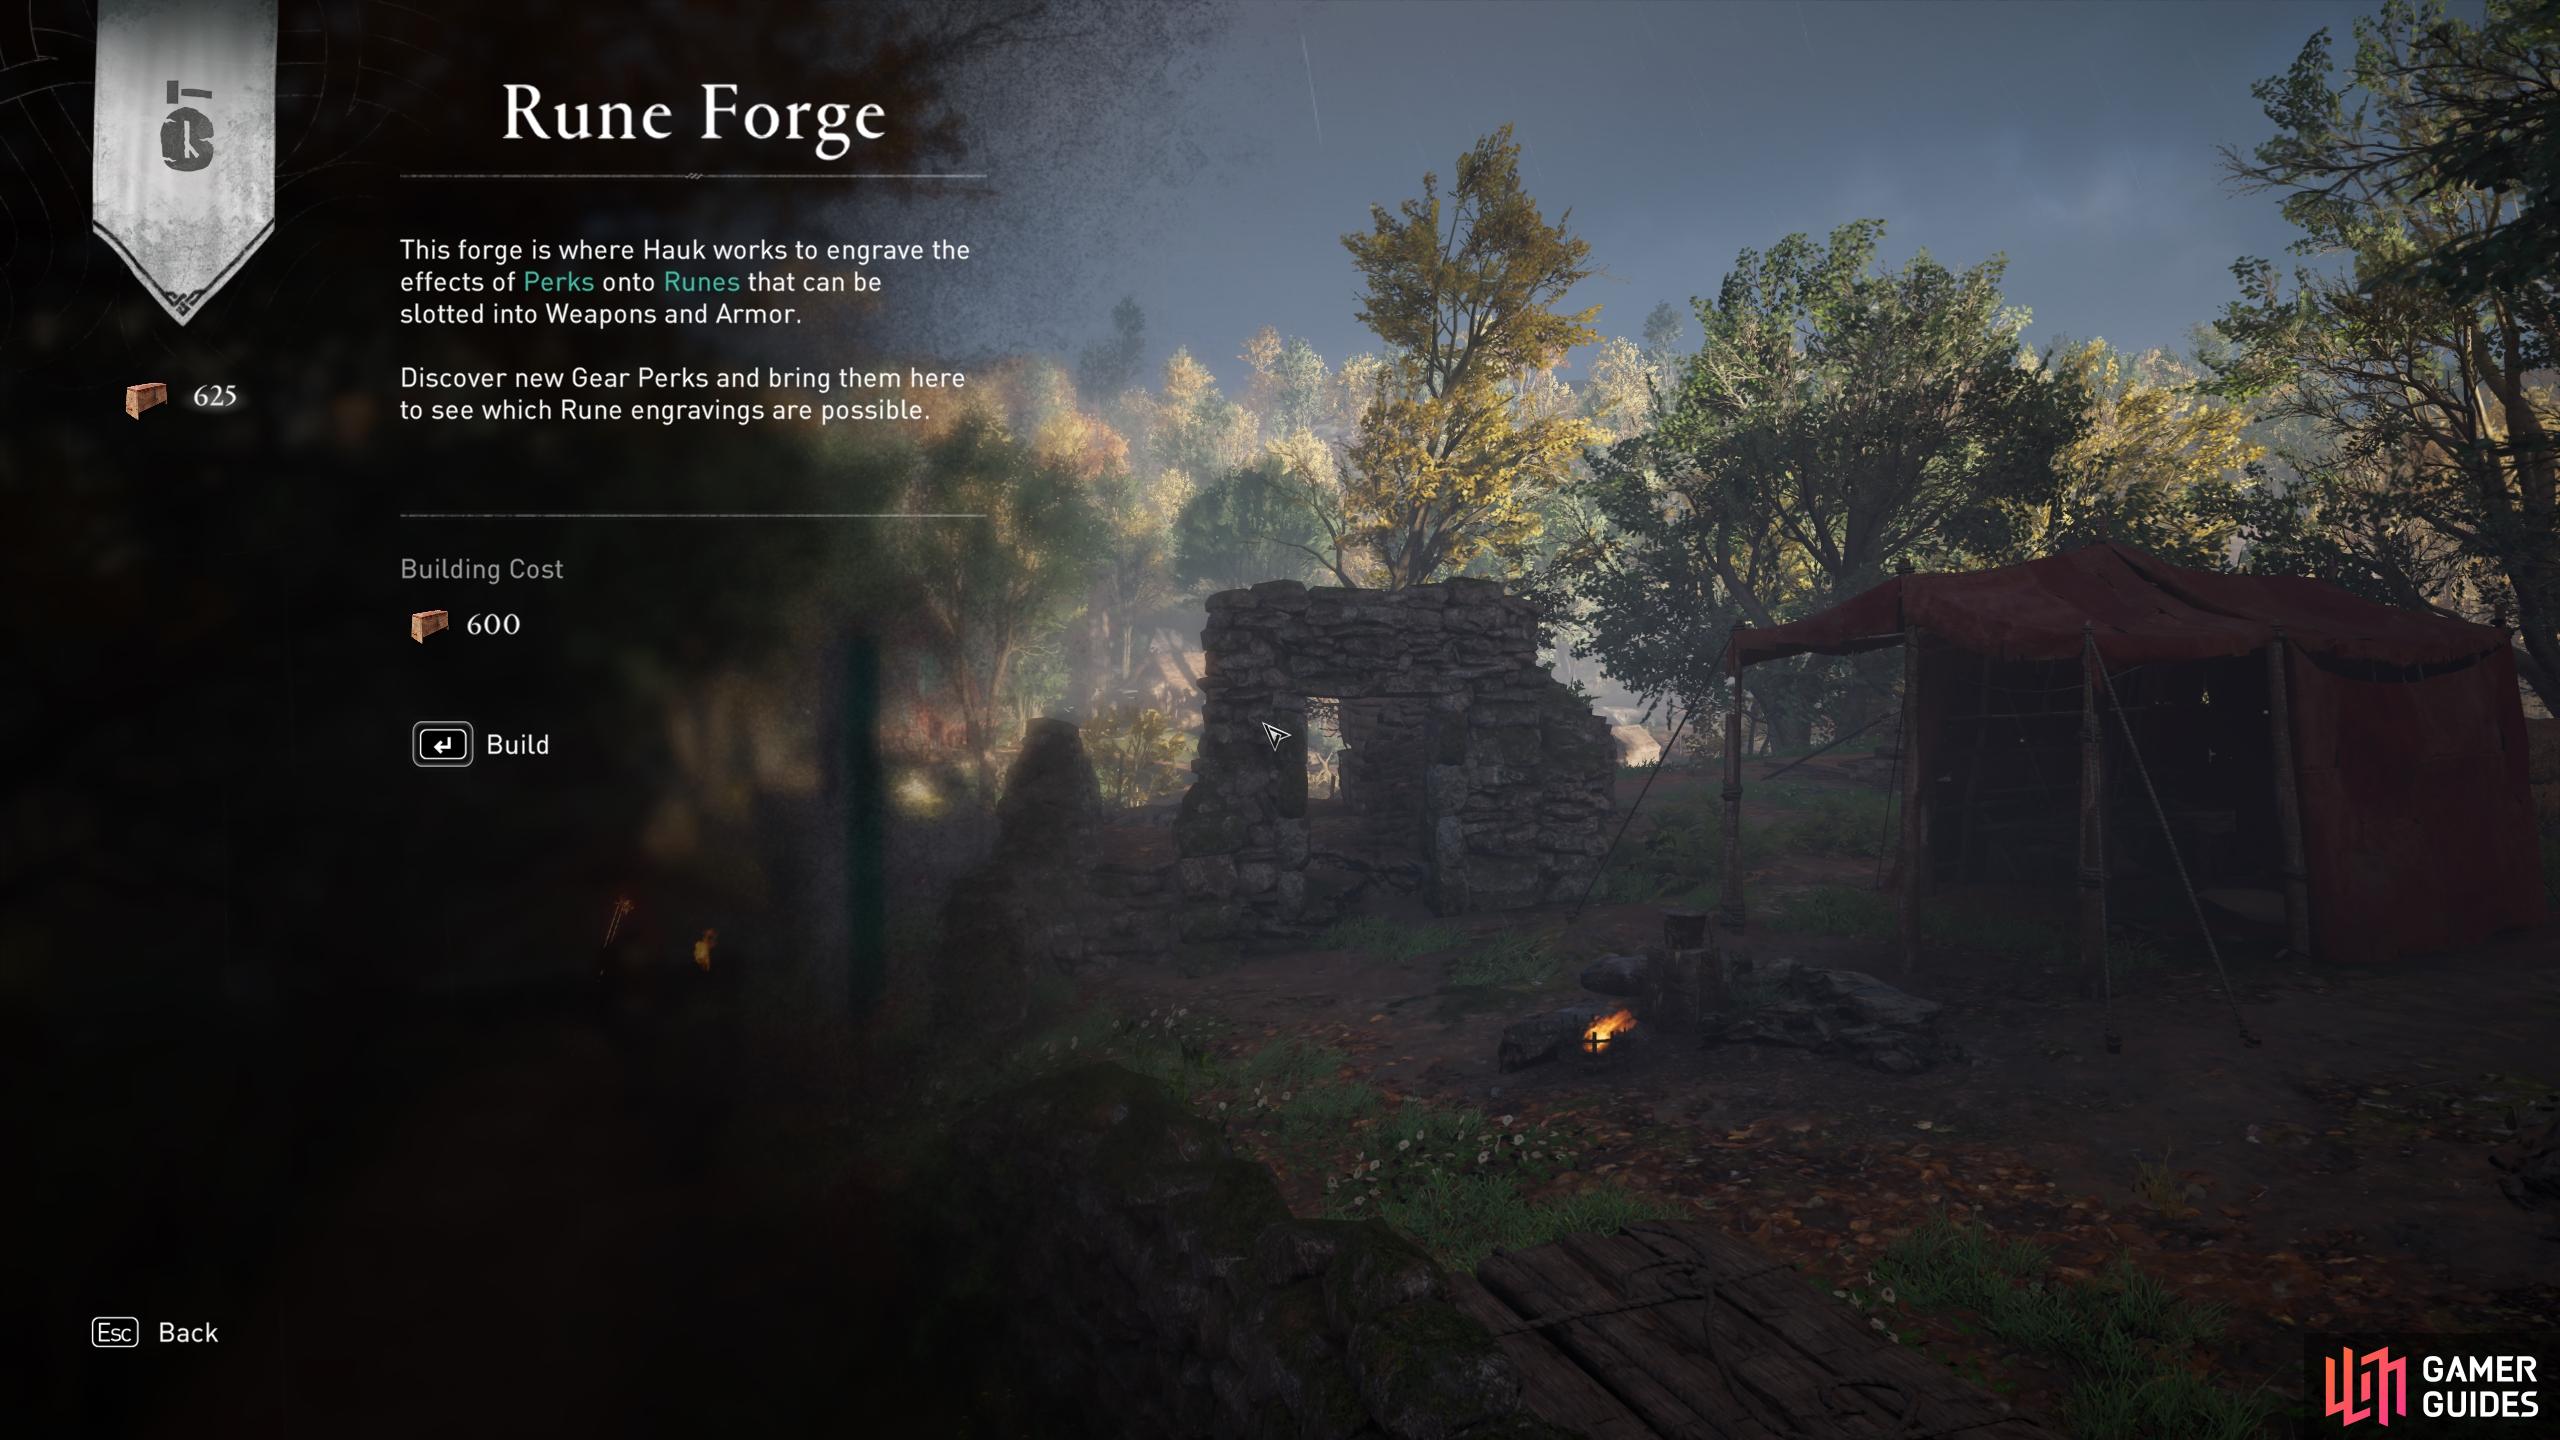 You'll need 600 Foreign Supplies to build the Rune Forge, which you an acquire from River Raids.